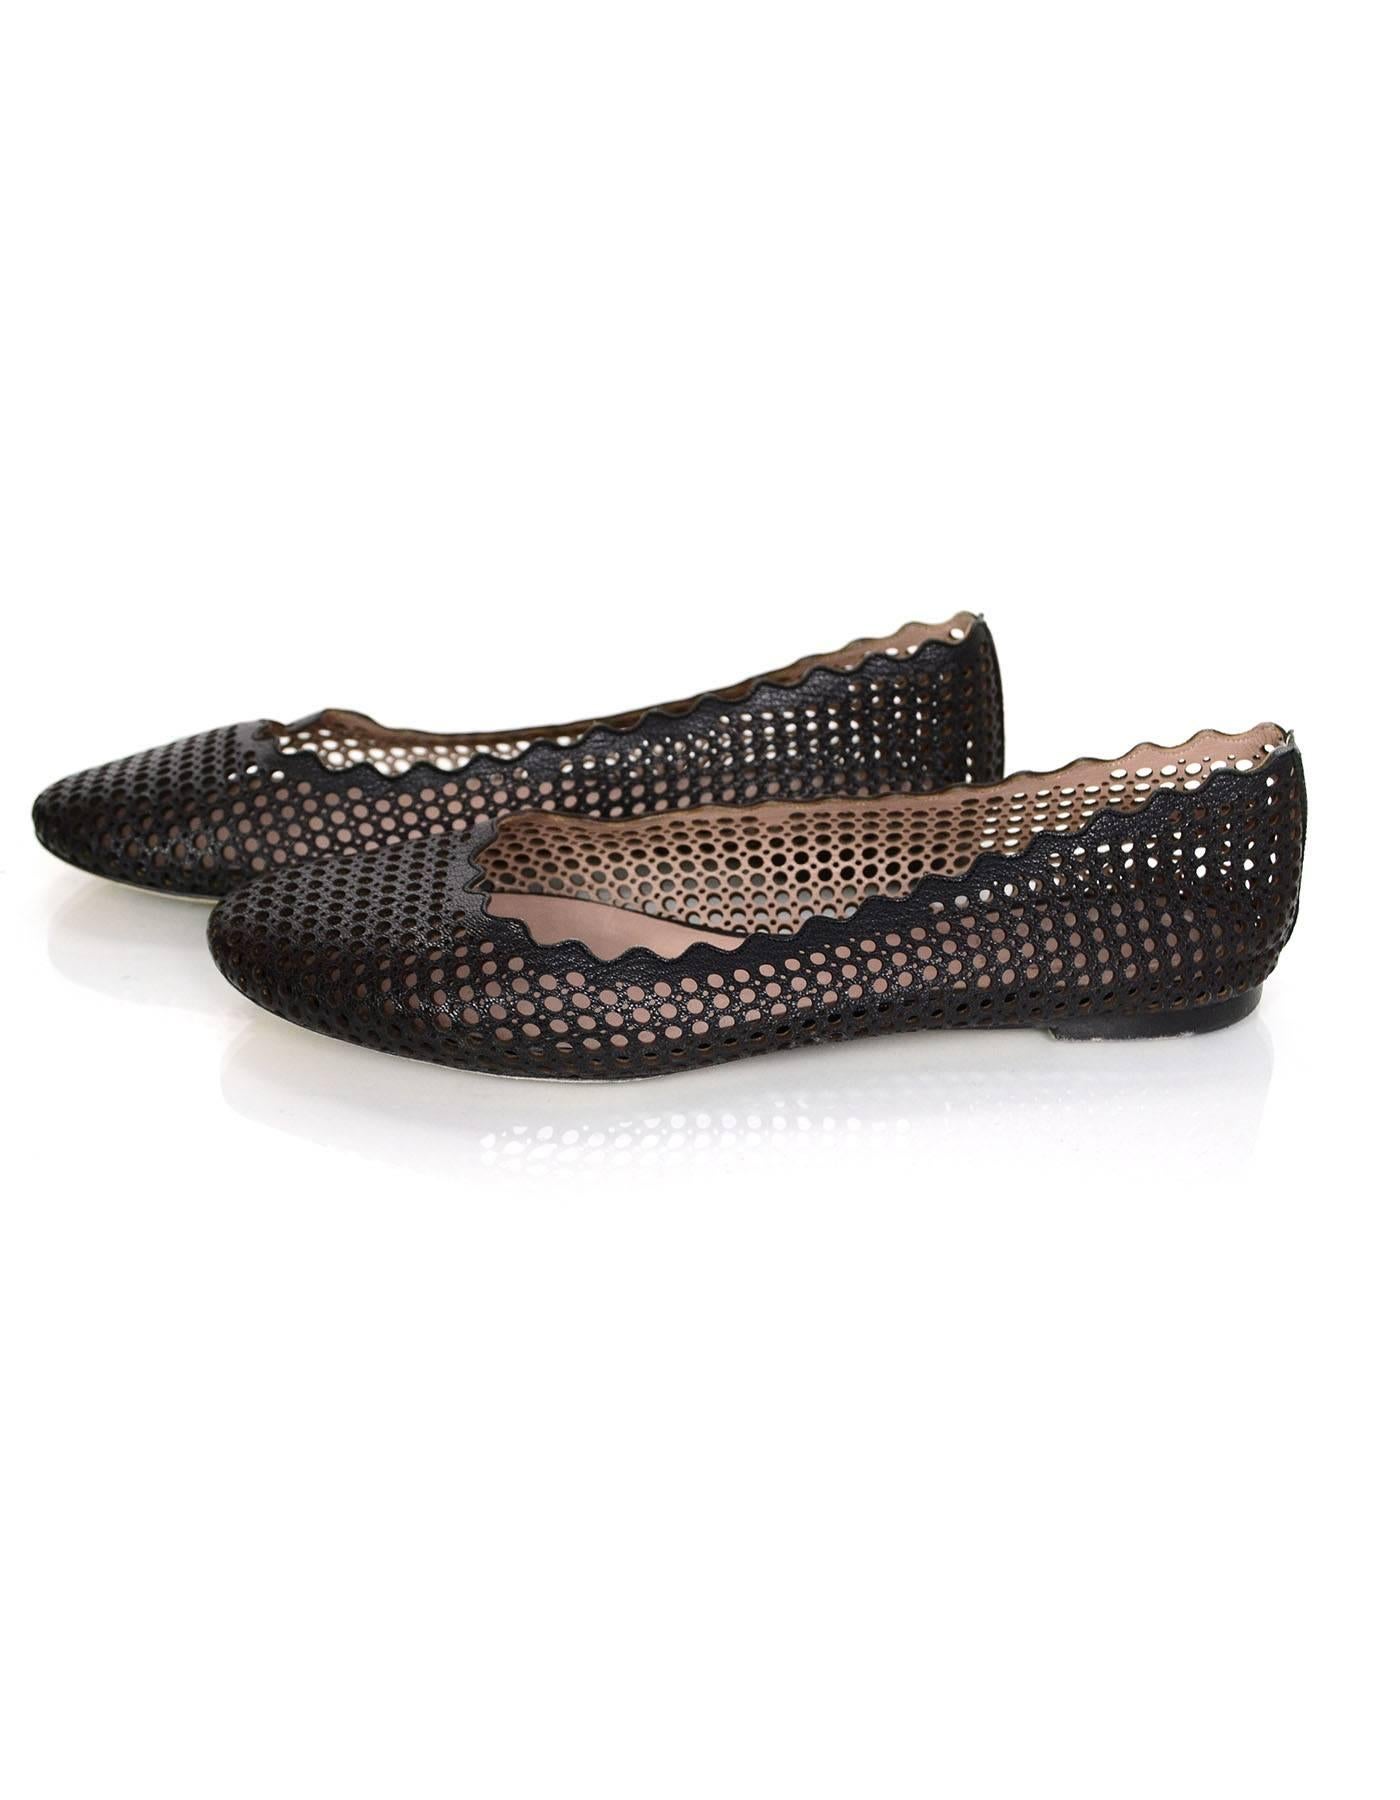 100% Authentic Chloe black leather Lauren flats sz 40 with perforated scalloped trim

Made In: Italy
Color: Black
Materials: Leather
Closure: Slip on
Sole Stamp: Chloe Made in Italy 40
Retail Price: $475 + tax
Overall Condition: Excellent